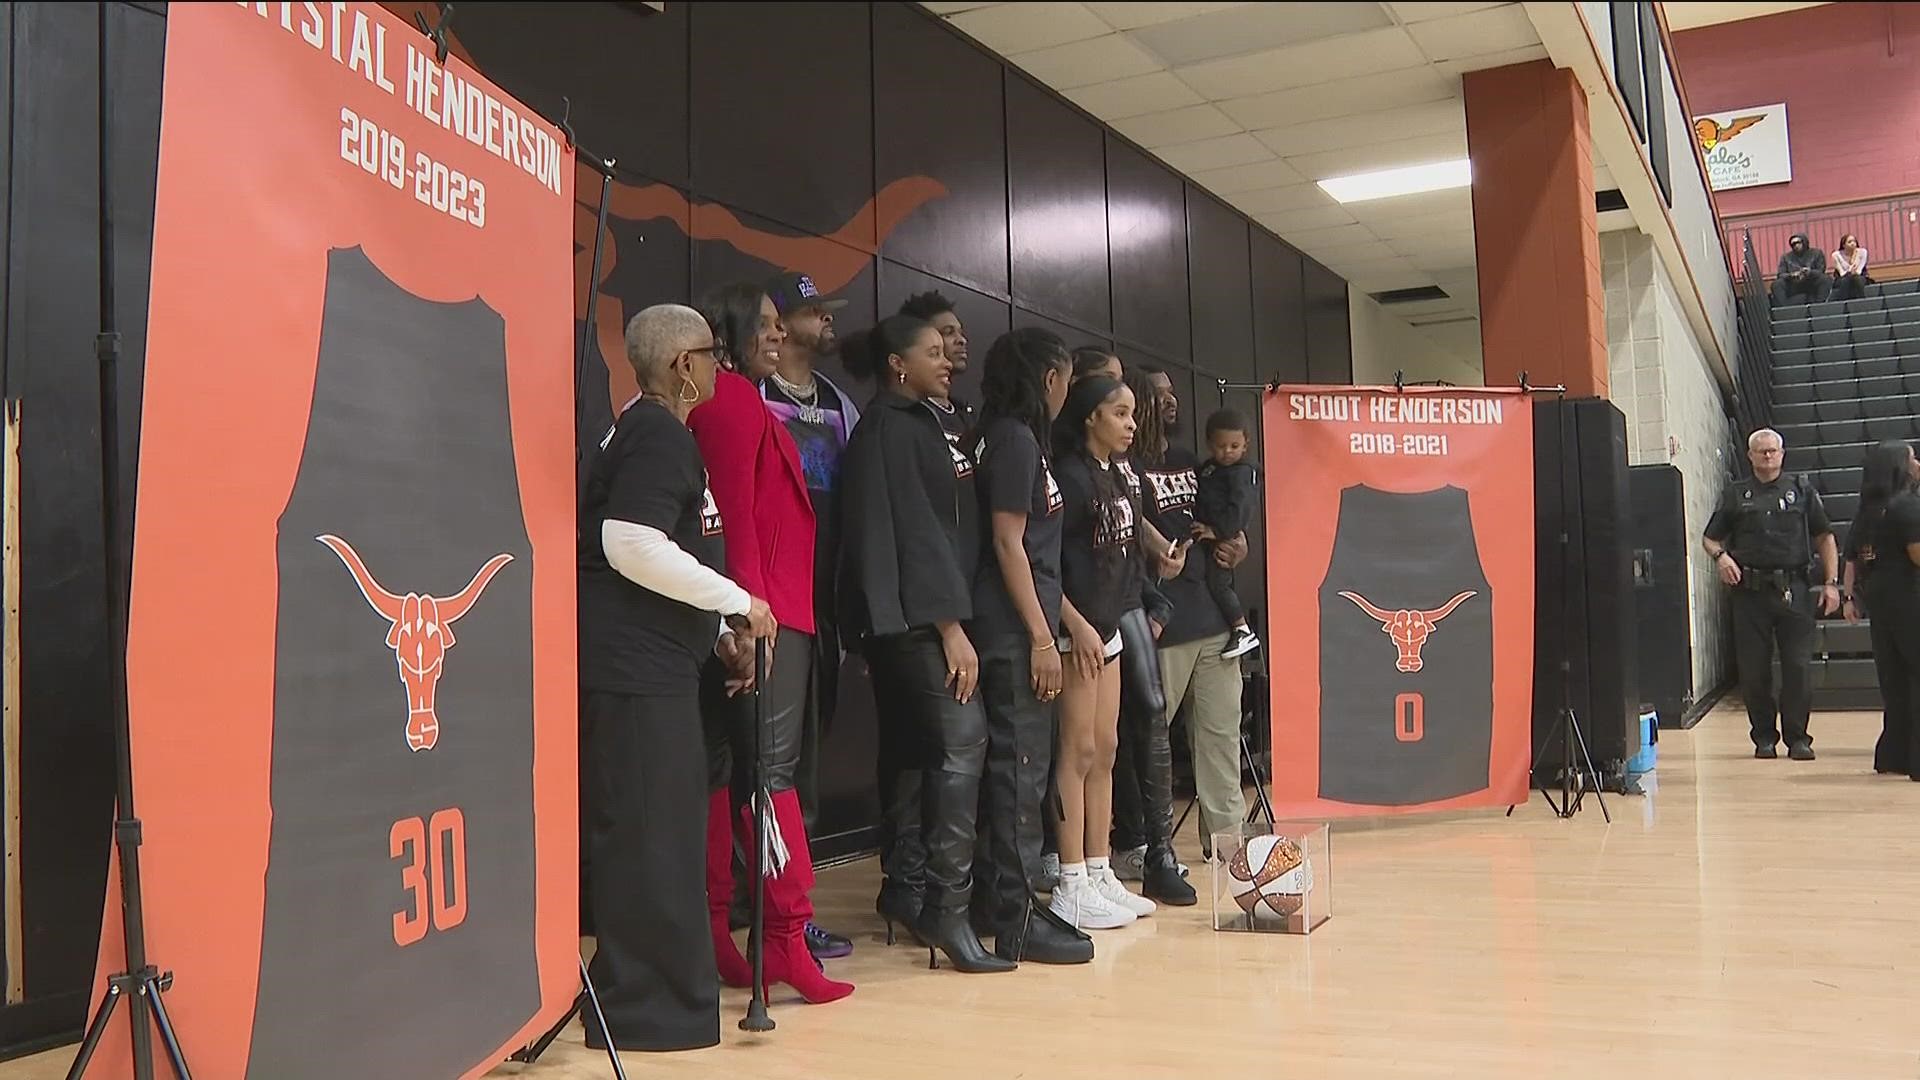 It’s not every day you see two high school jerseys retired as early as these young superstars have, but they’ve accomplished a lot.